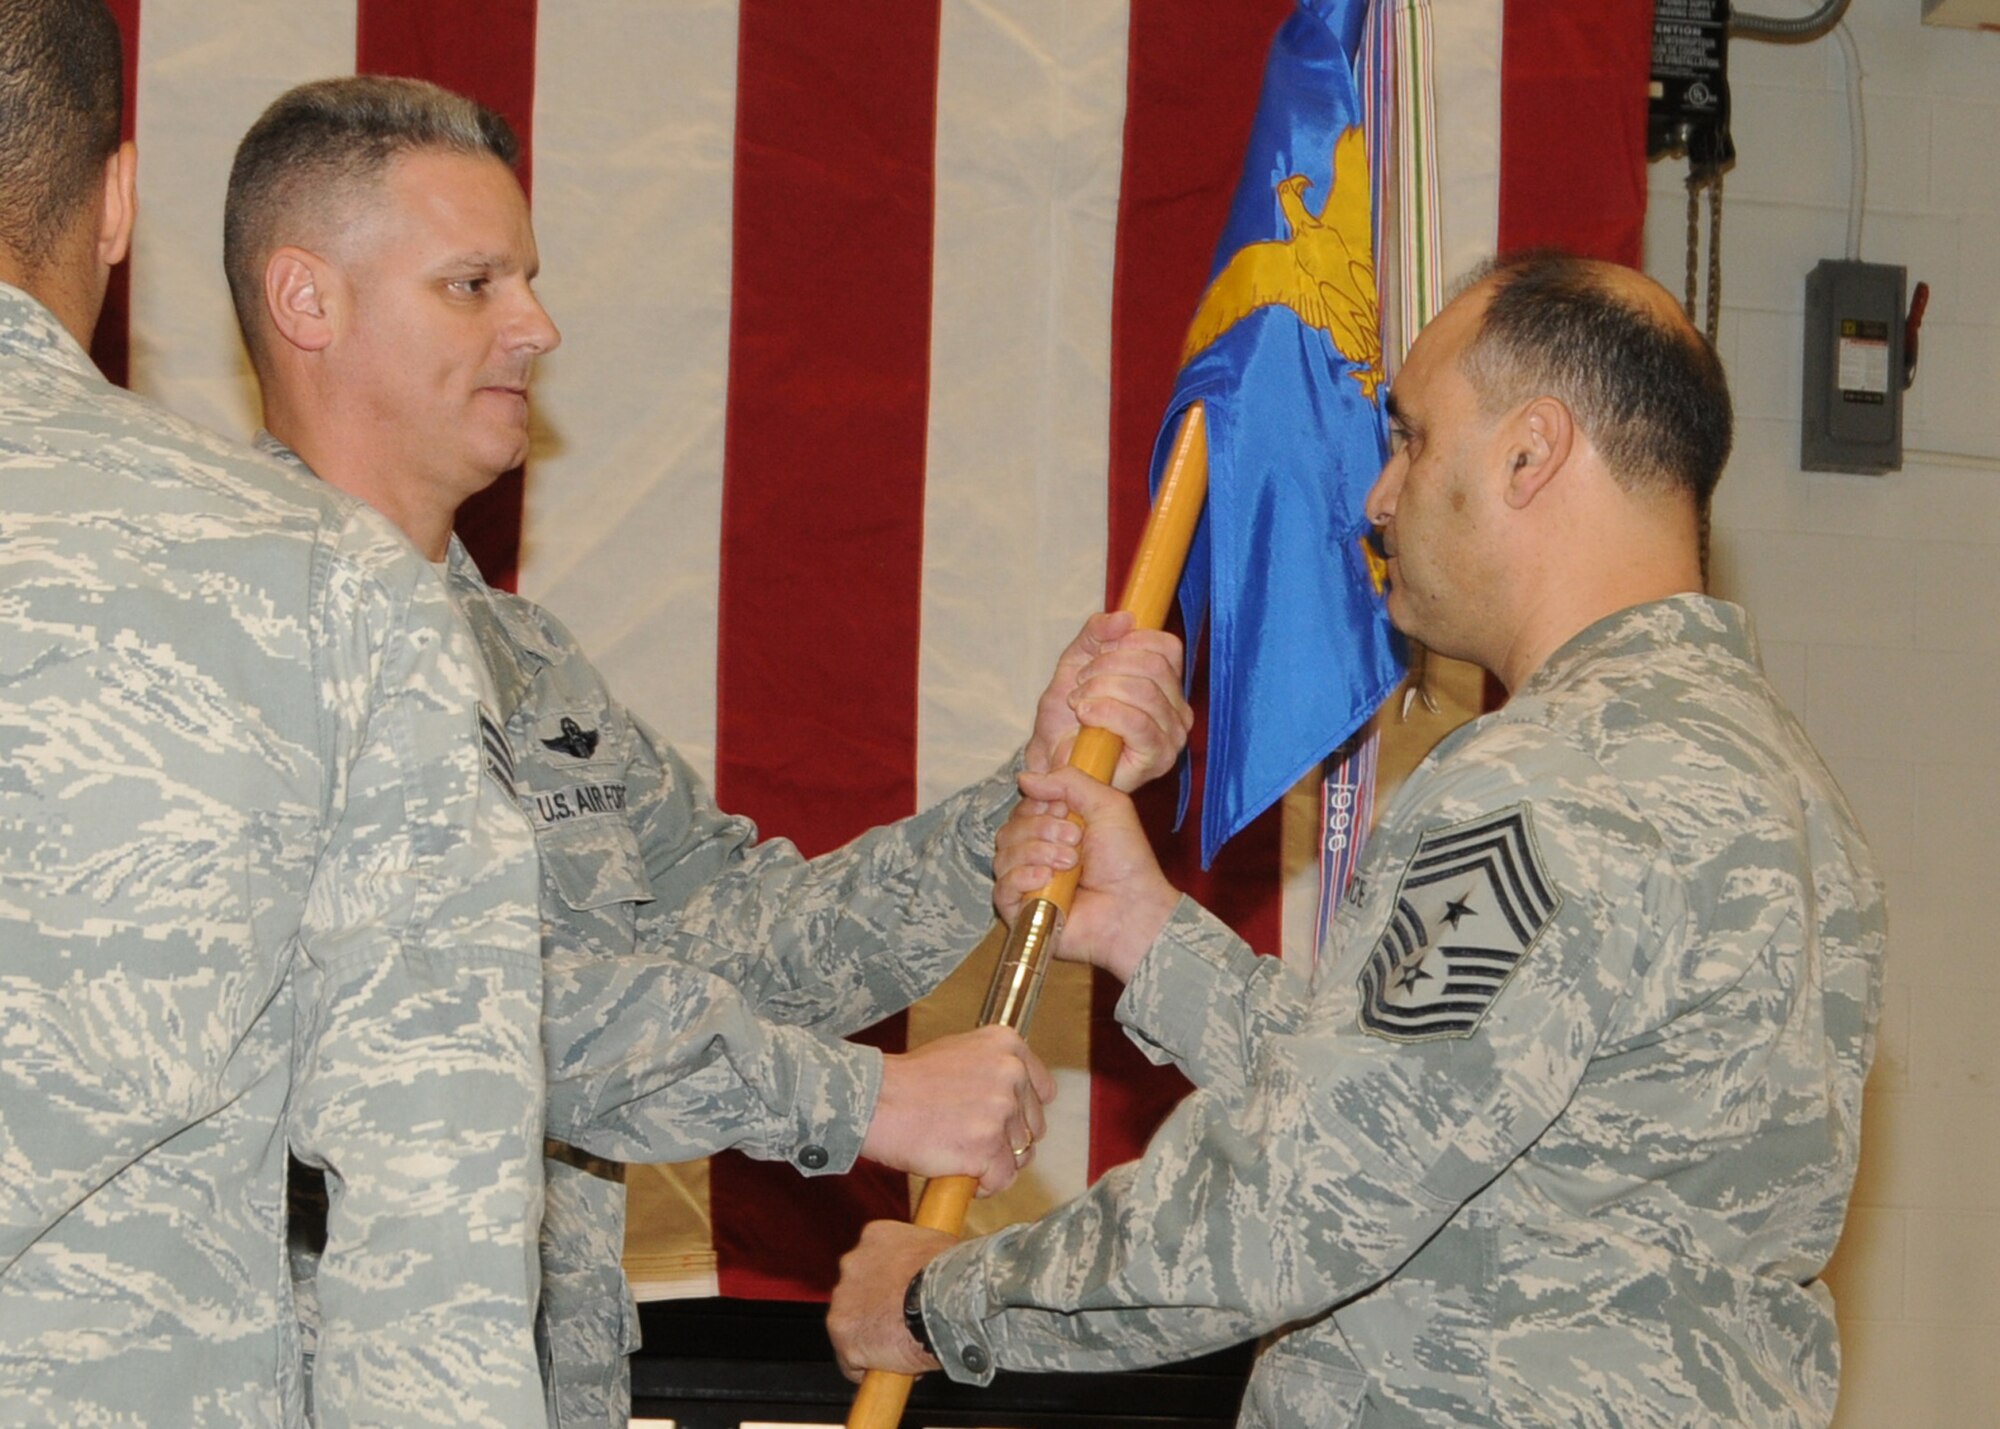 Incomming Command Chief Master Sergeant Jose Baltazar, 143d Airlift Wing (AW), Rhode Island Air National Guard, assumes authority as the Command Chief of the 143d AW from Colonel Arthur Floru, Commander of the 143d AW at a ceremony held at Quonset Air National Guard Base, North Kingstown, Rhode Island. National Guard Photo by Master Sergeant John McDonald (RELEASED)